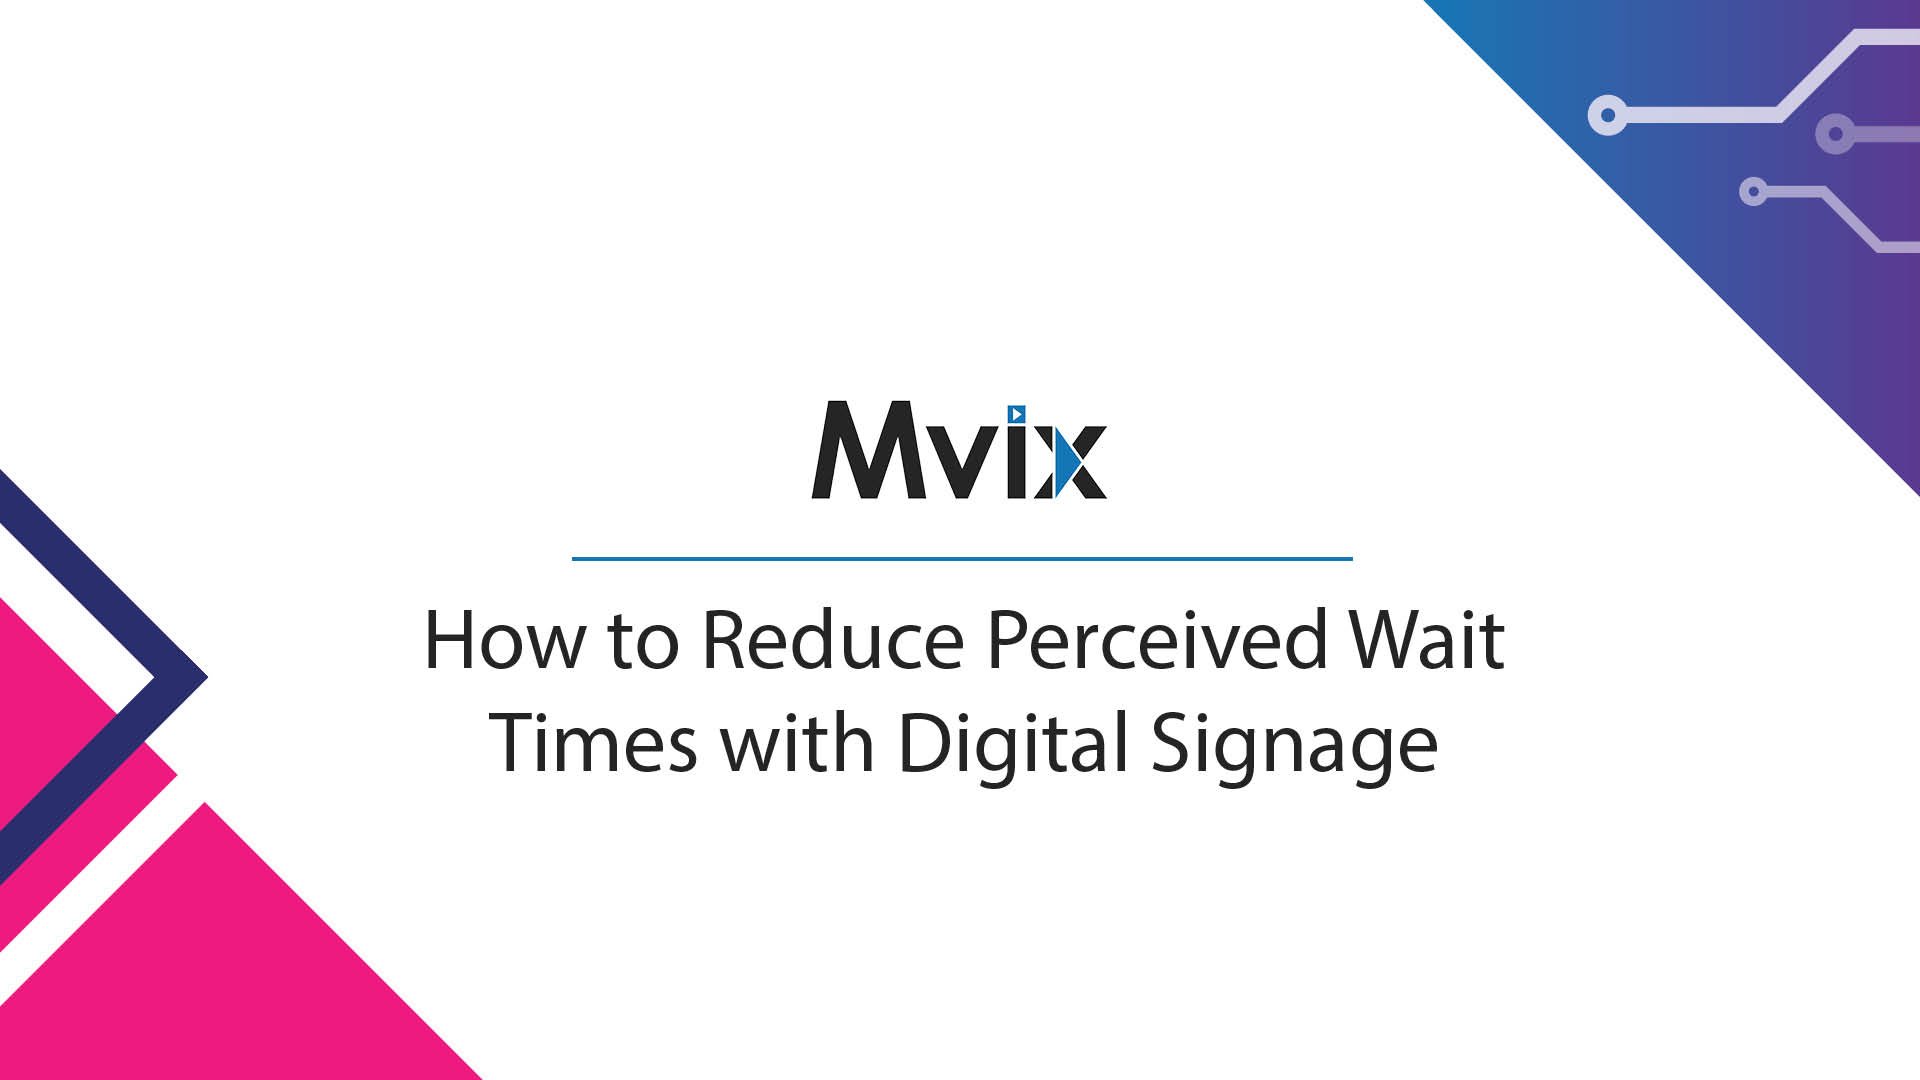 How to Reduce Perceived Wait Times